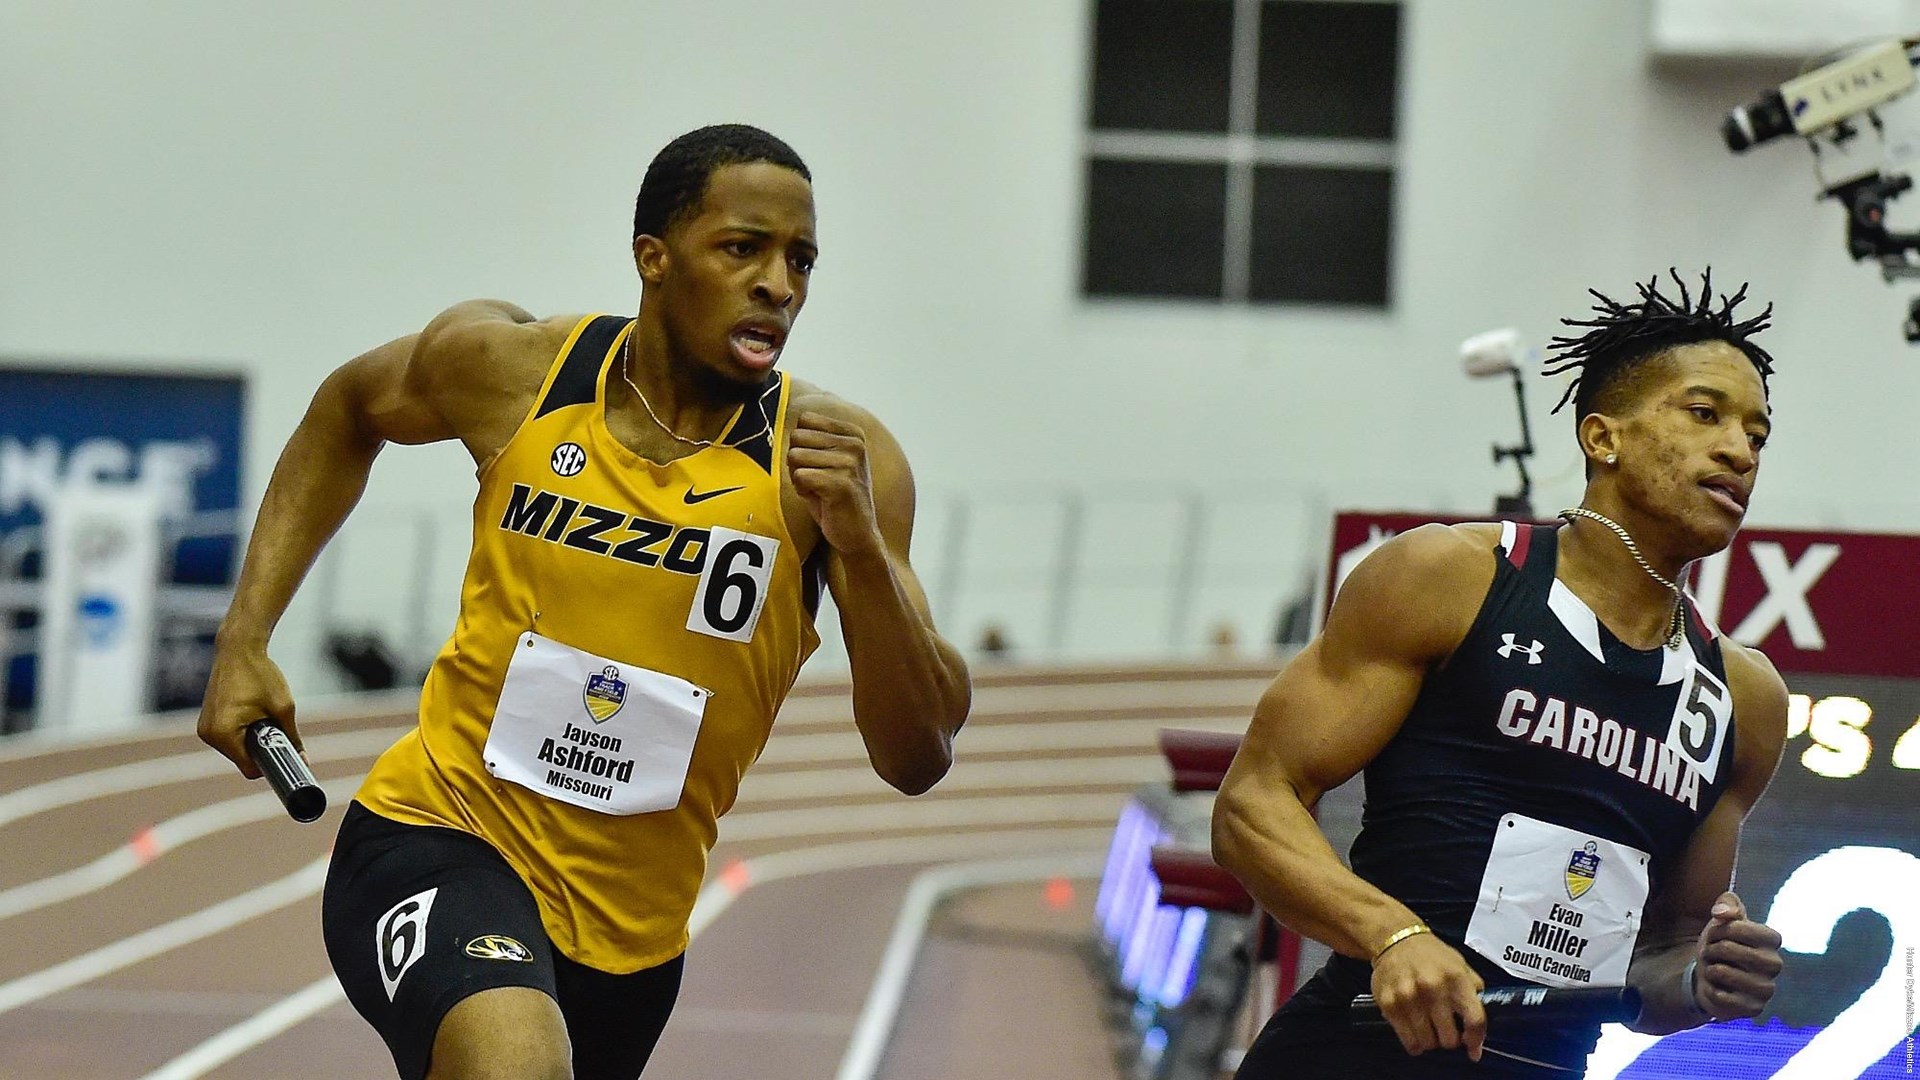 Jayson Ashford
Mizzou Tigers at SEC Indoor Championships in College Station, TX. on Saturday, February 26, 2022. 
(Photo by Jeff Curry)